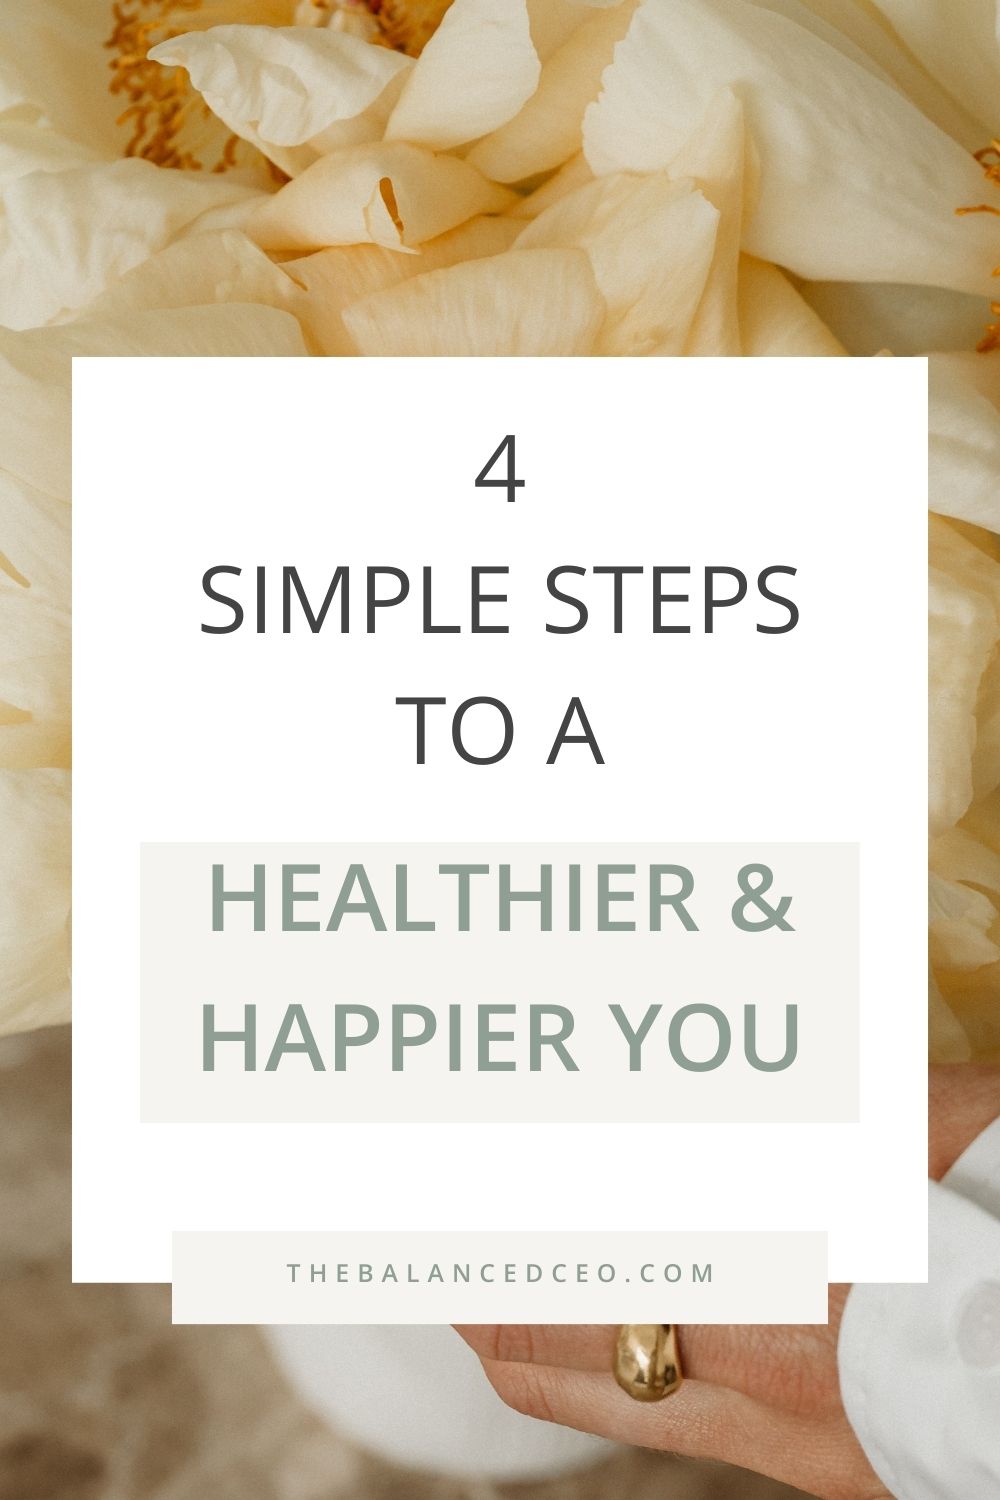 4 Simple Steps to a Happier and Healthier You